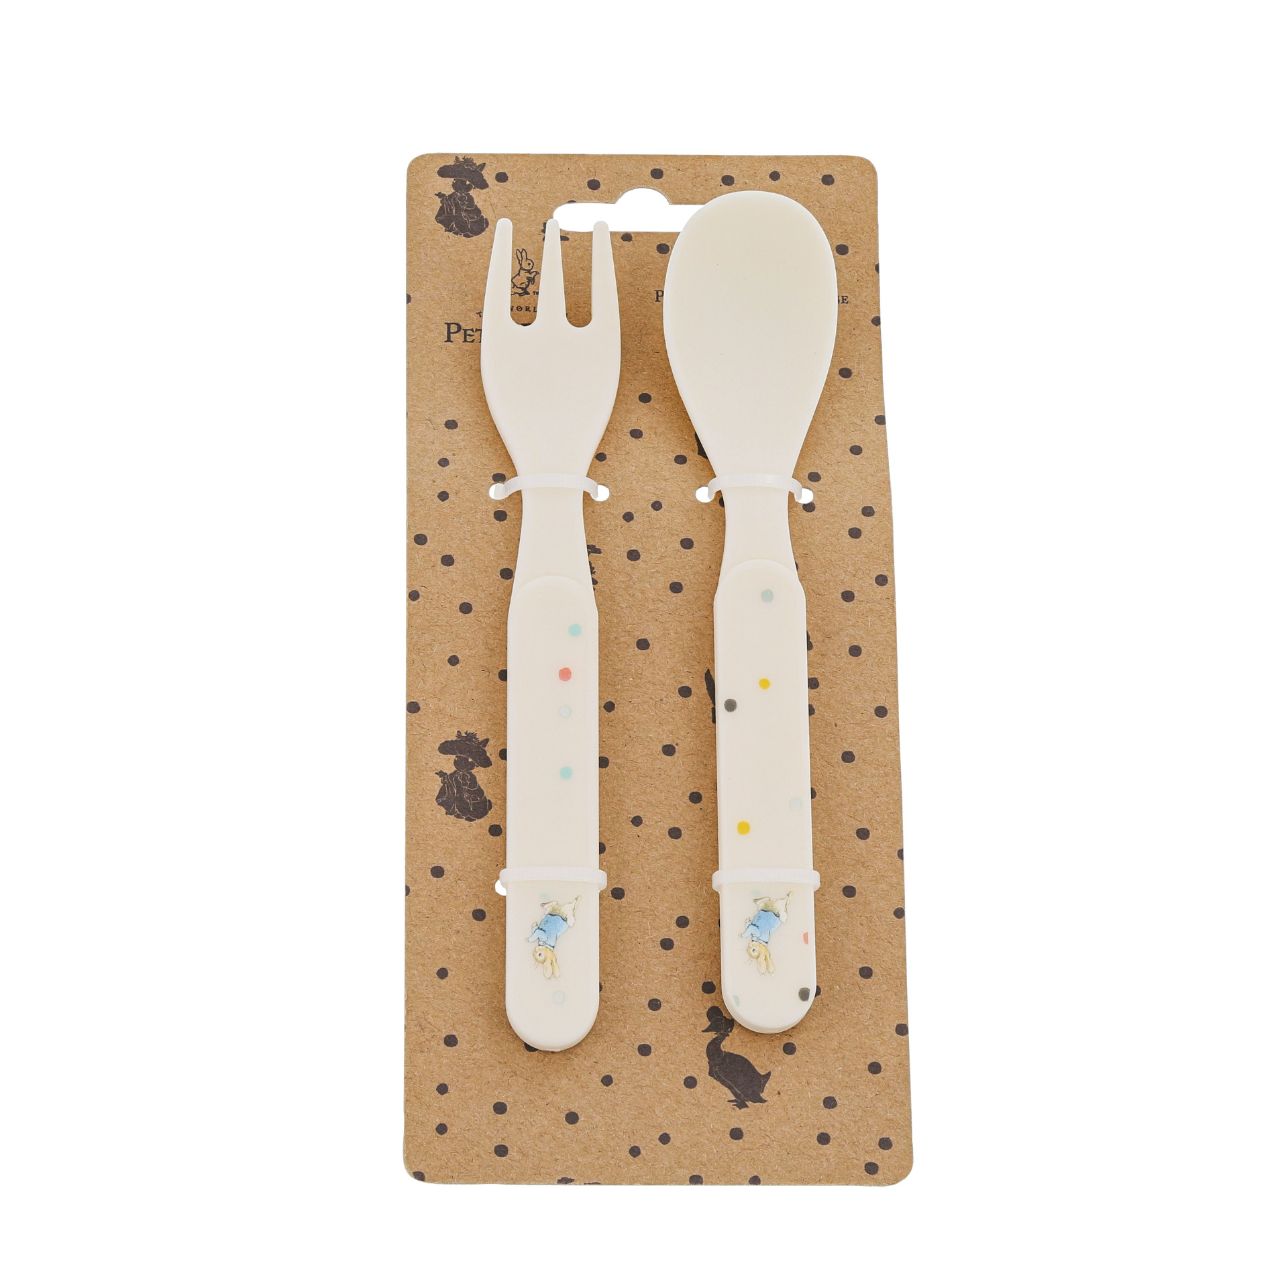 Peter Rabbit Fork and Spoon Set  Introducing this brand new at home with Peter Rabbit collection. There's nothing quite like a fun Peter Rabbit motif to entice those little tummies to clear their plates. Make mealtimes fun and practical with this fork and spoon set.